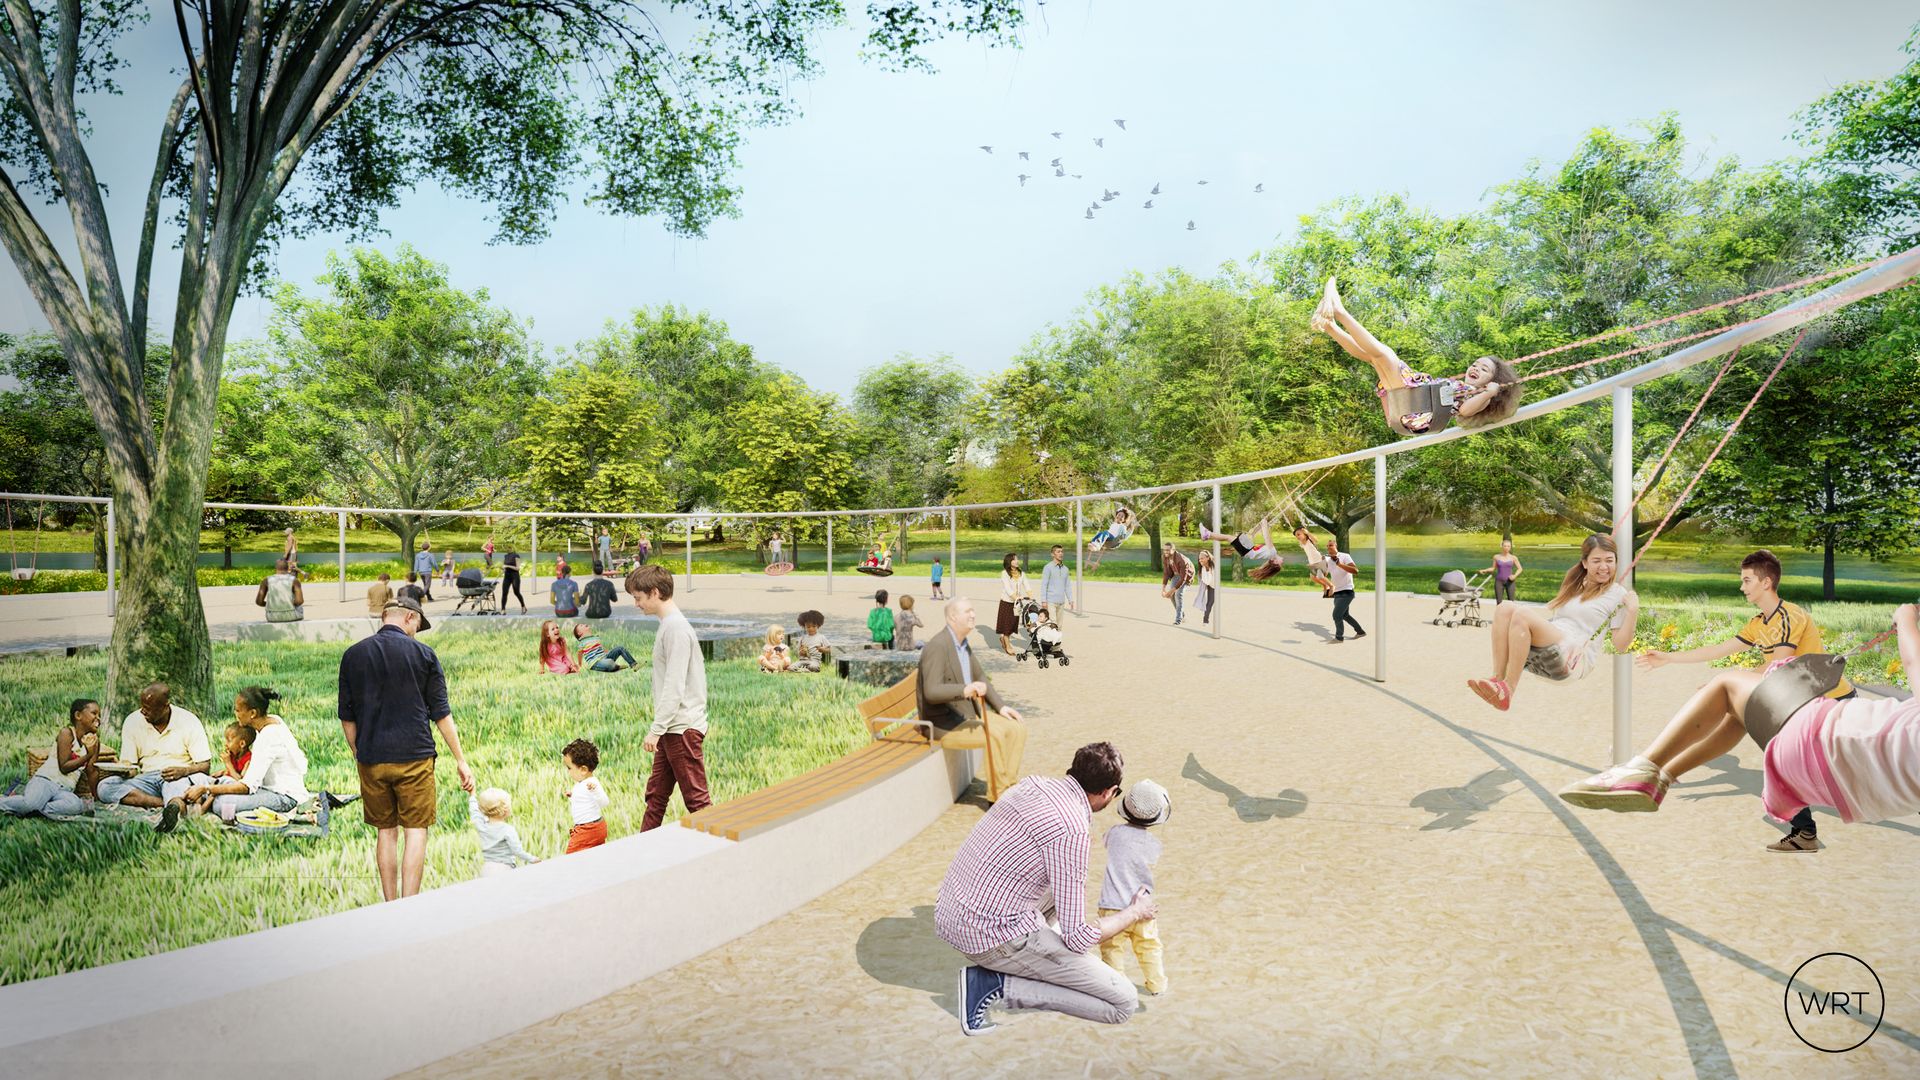 A rendering of the "megaswing" opening in August at Philly's FDR Park.